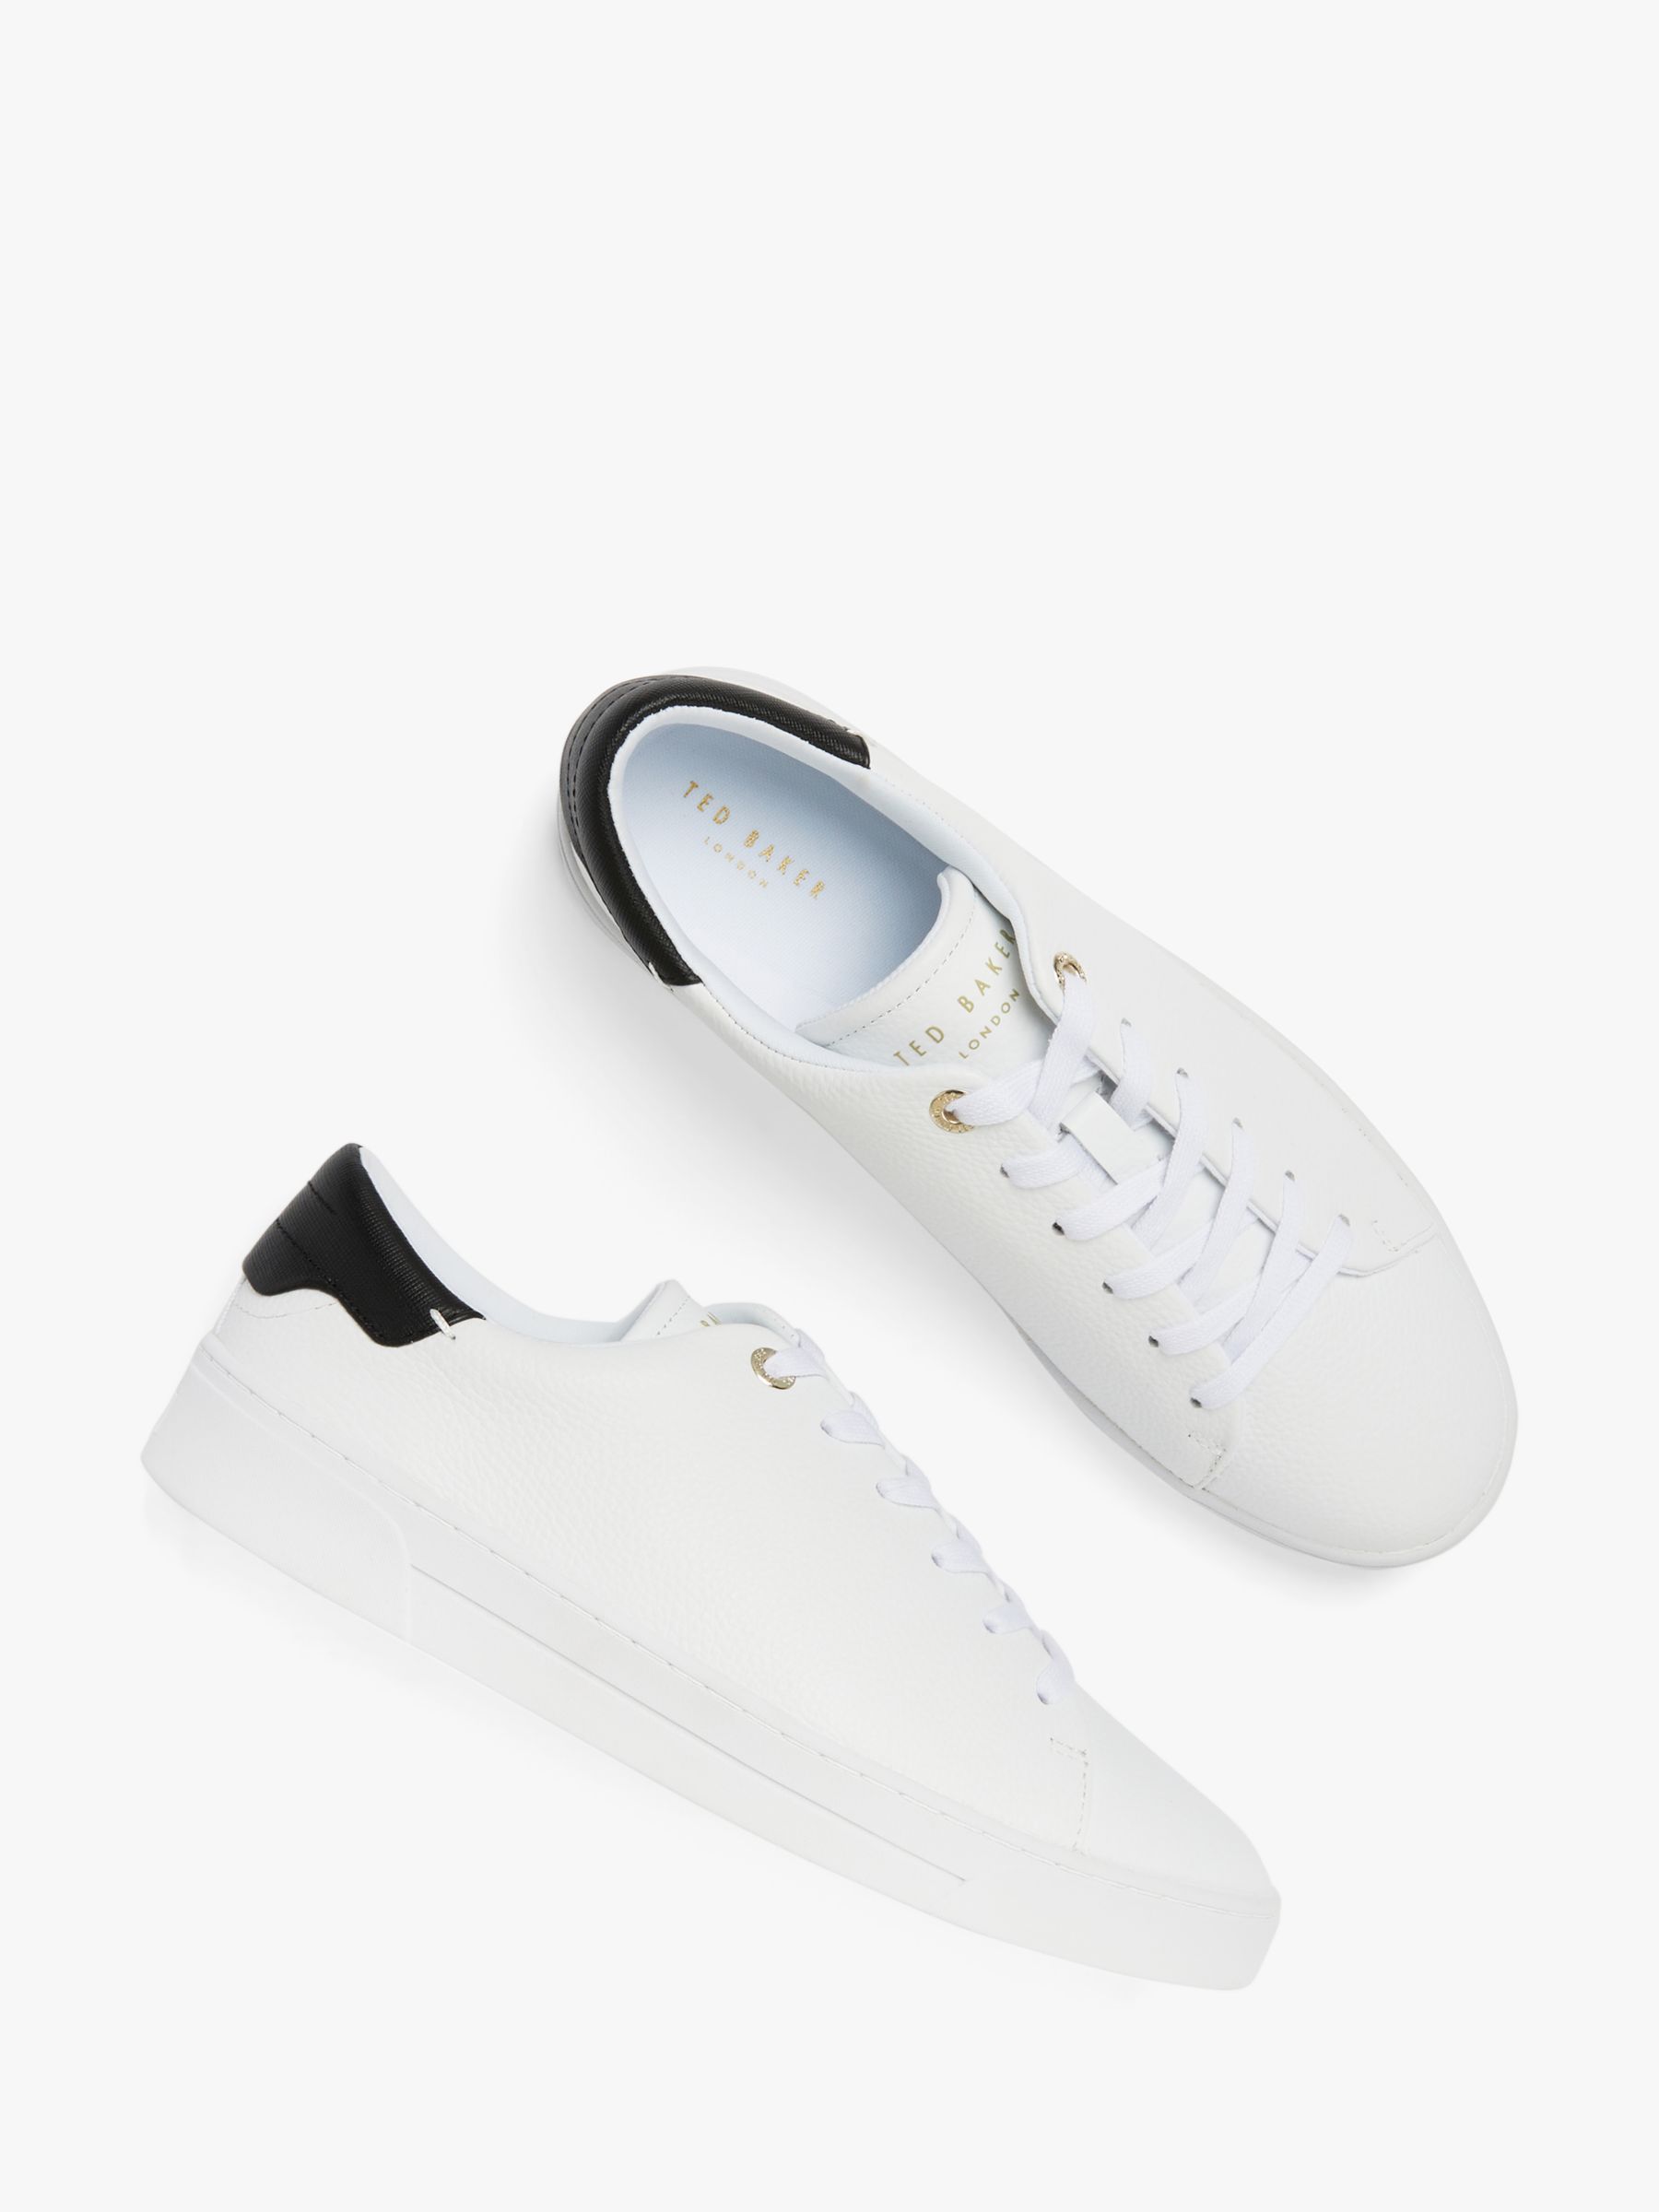 Ted Baker Tumbled Leather Low Top Trainers, White/Black, 3